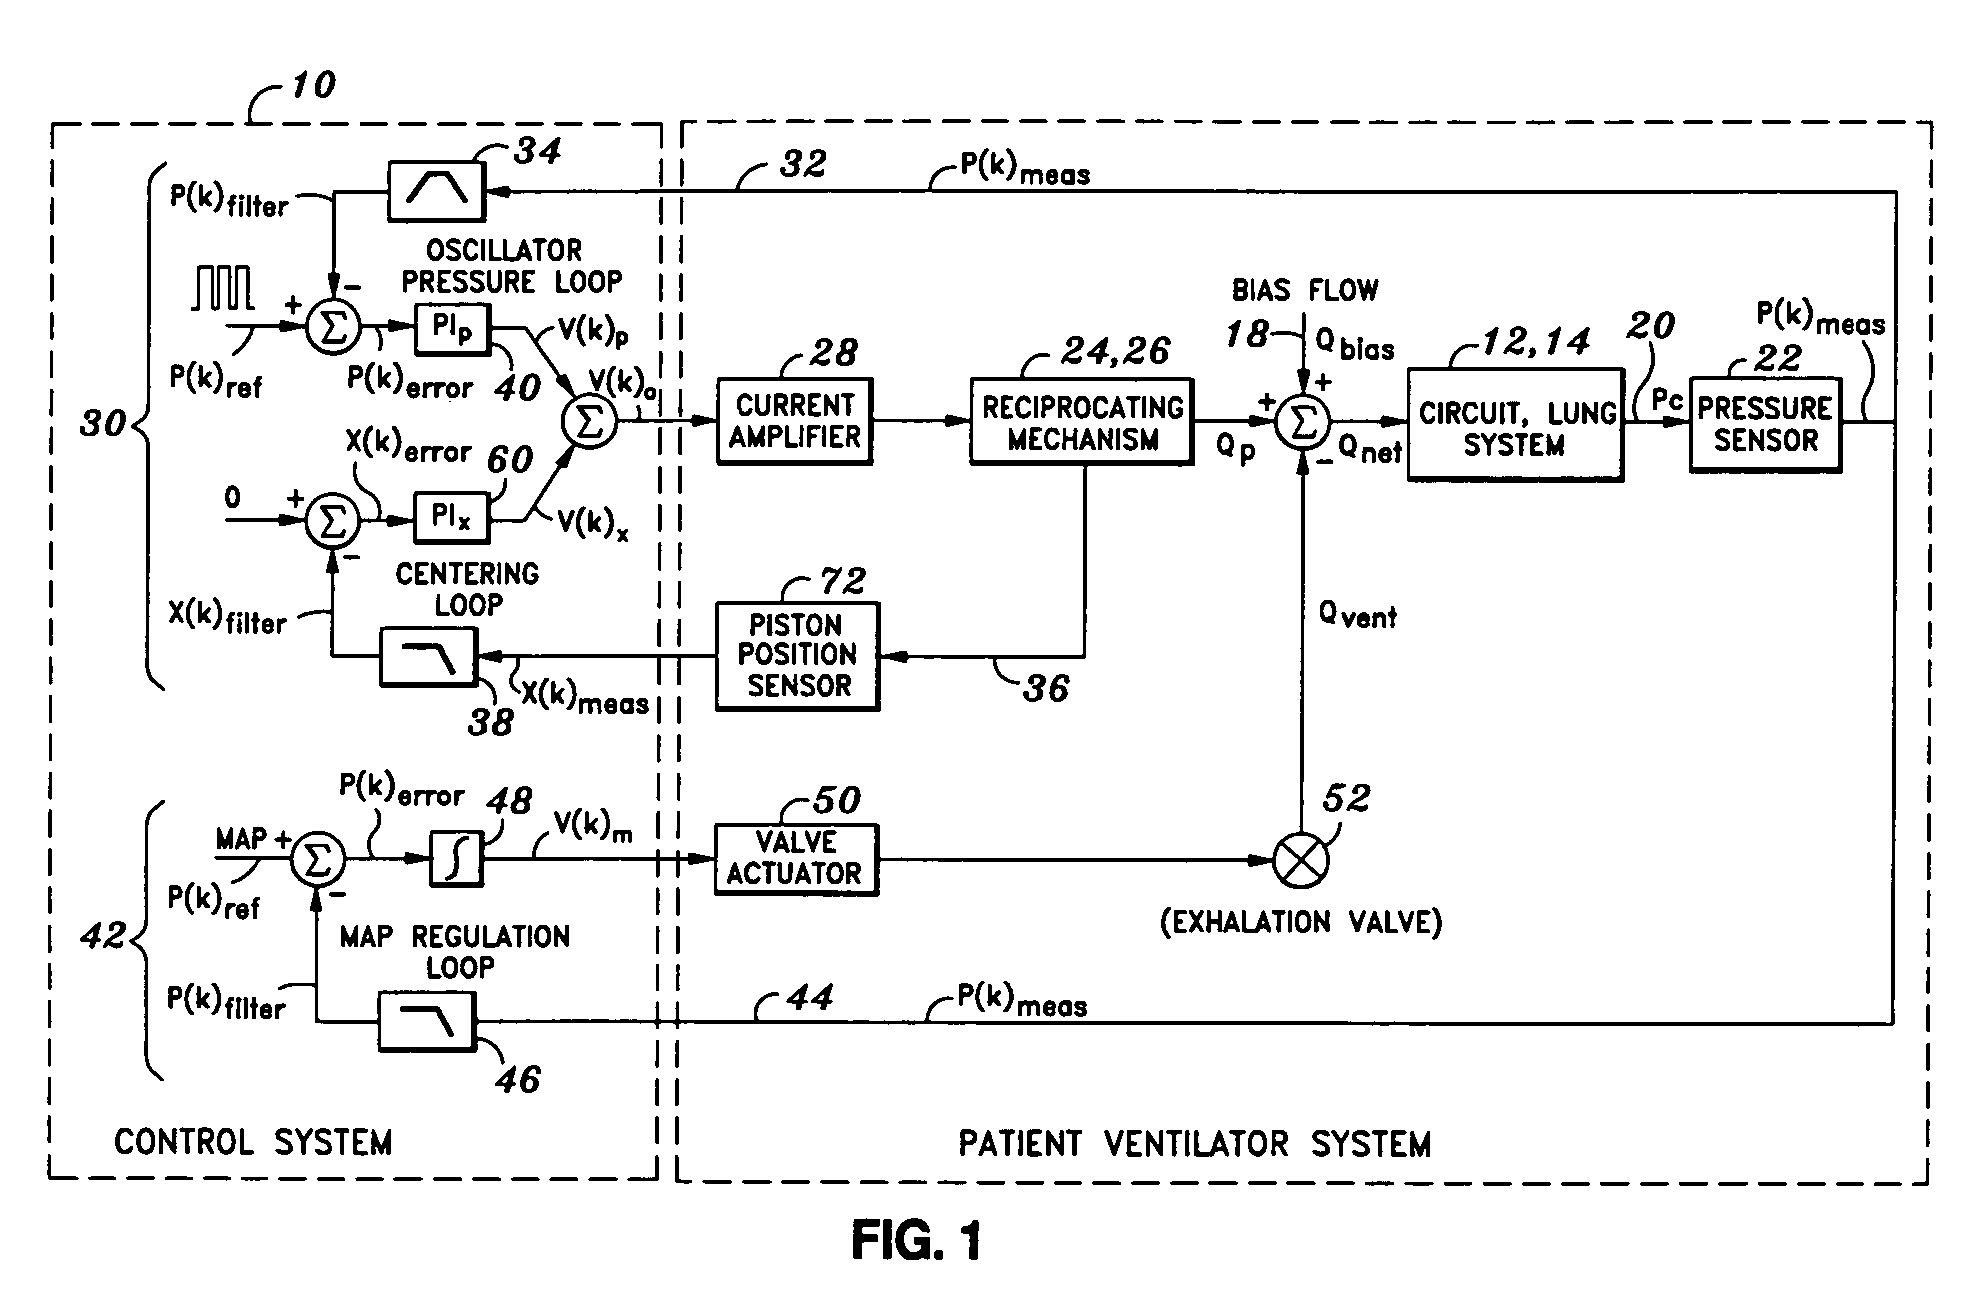 Closed loop control system for a high frequency oscillation ventilator